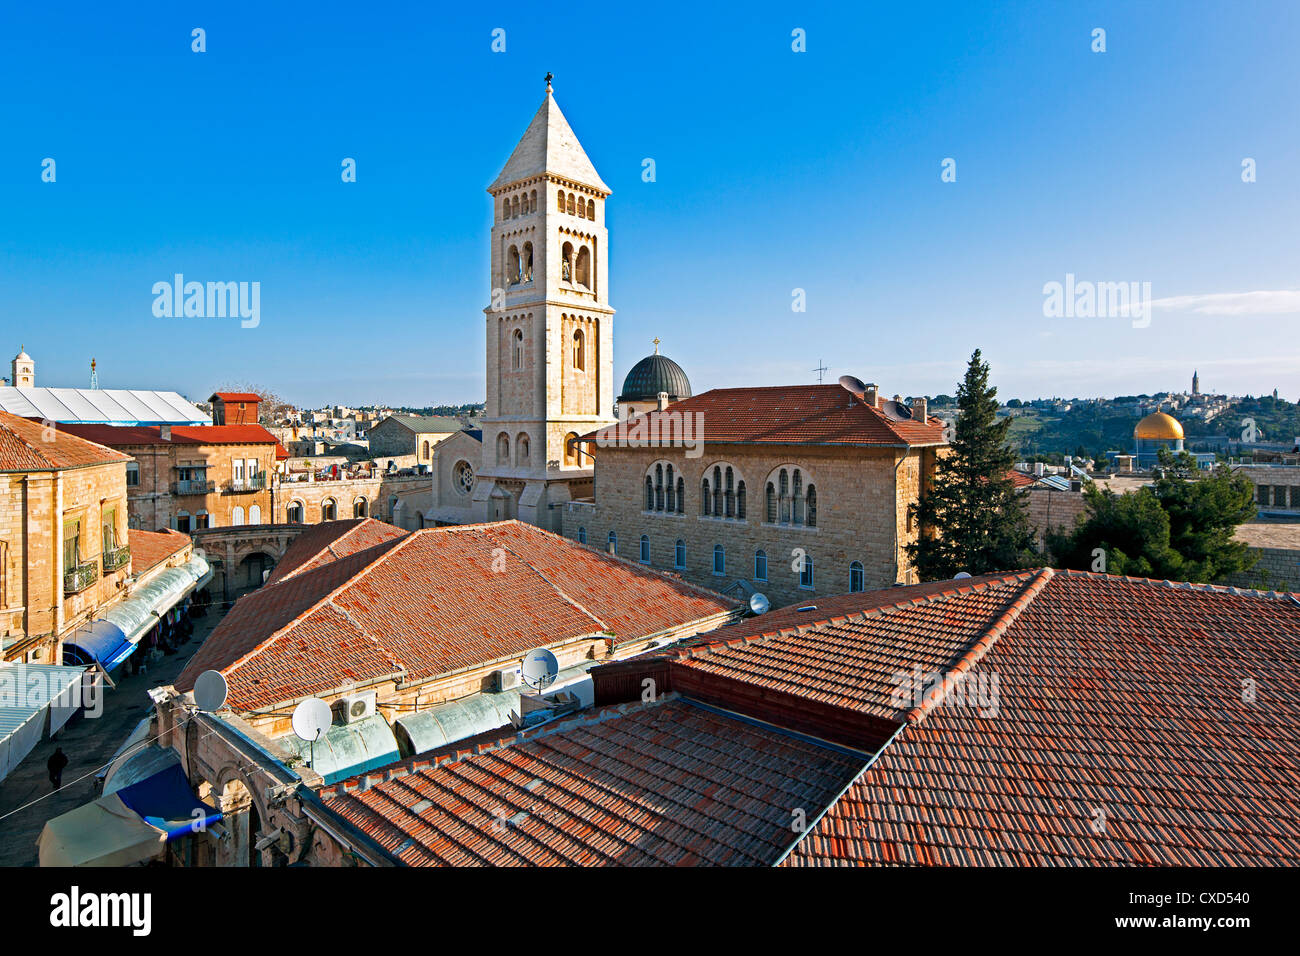 View towards the Church of the Redeemer, Jerusalem, Israel, Middle East Stock Photo